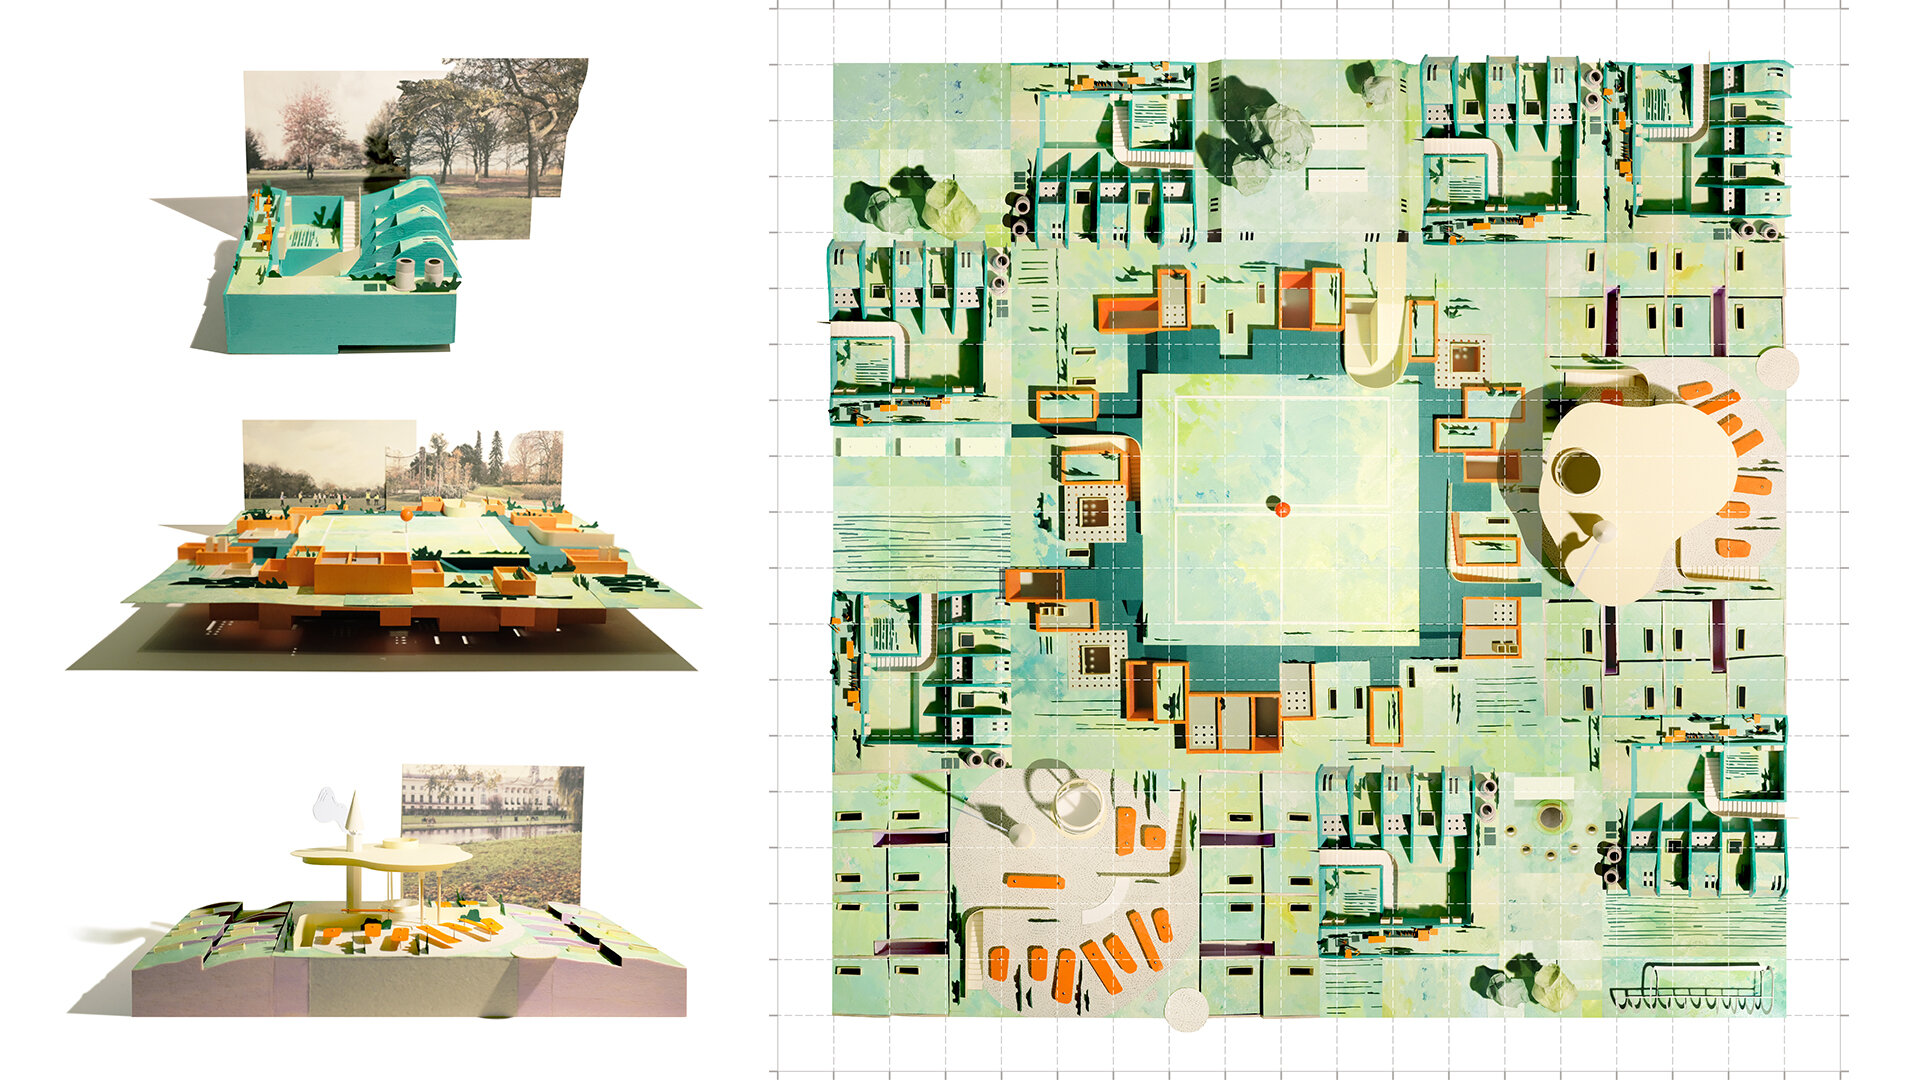 Productive Landscape - Regent’s Park Food Community_Meiying Hong_MArch Year 5, Bartlett School of Architecture, UCL 7.jpg